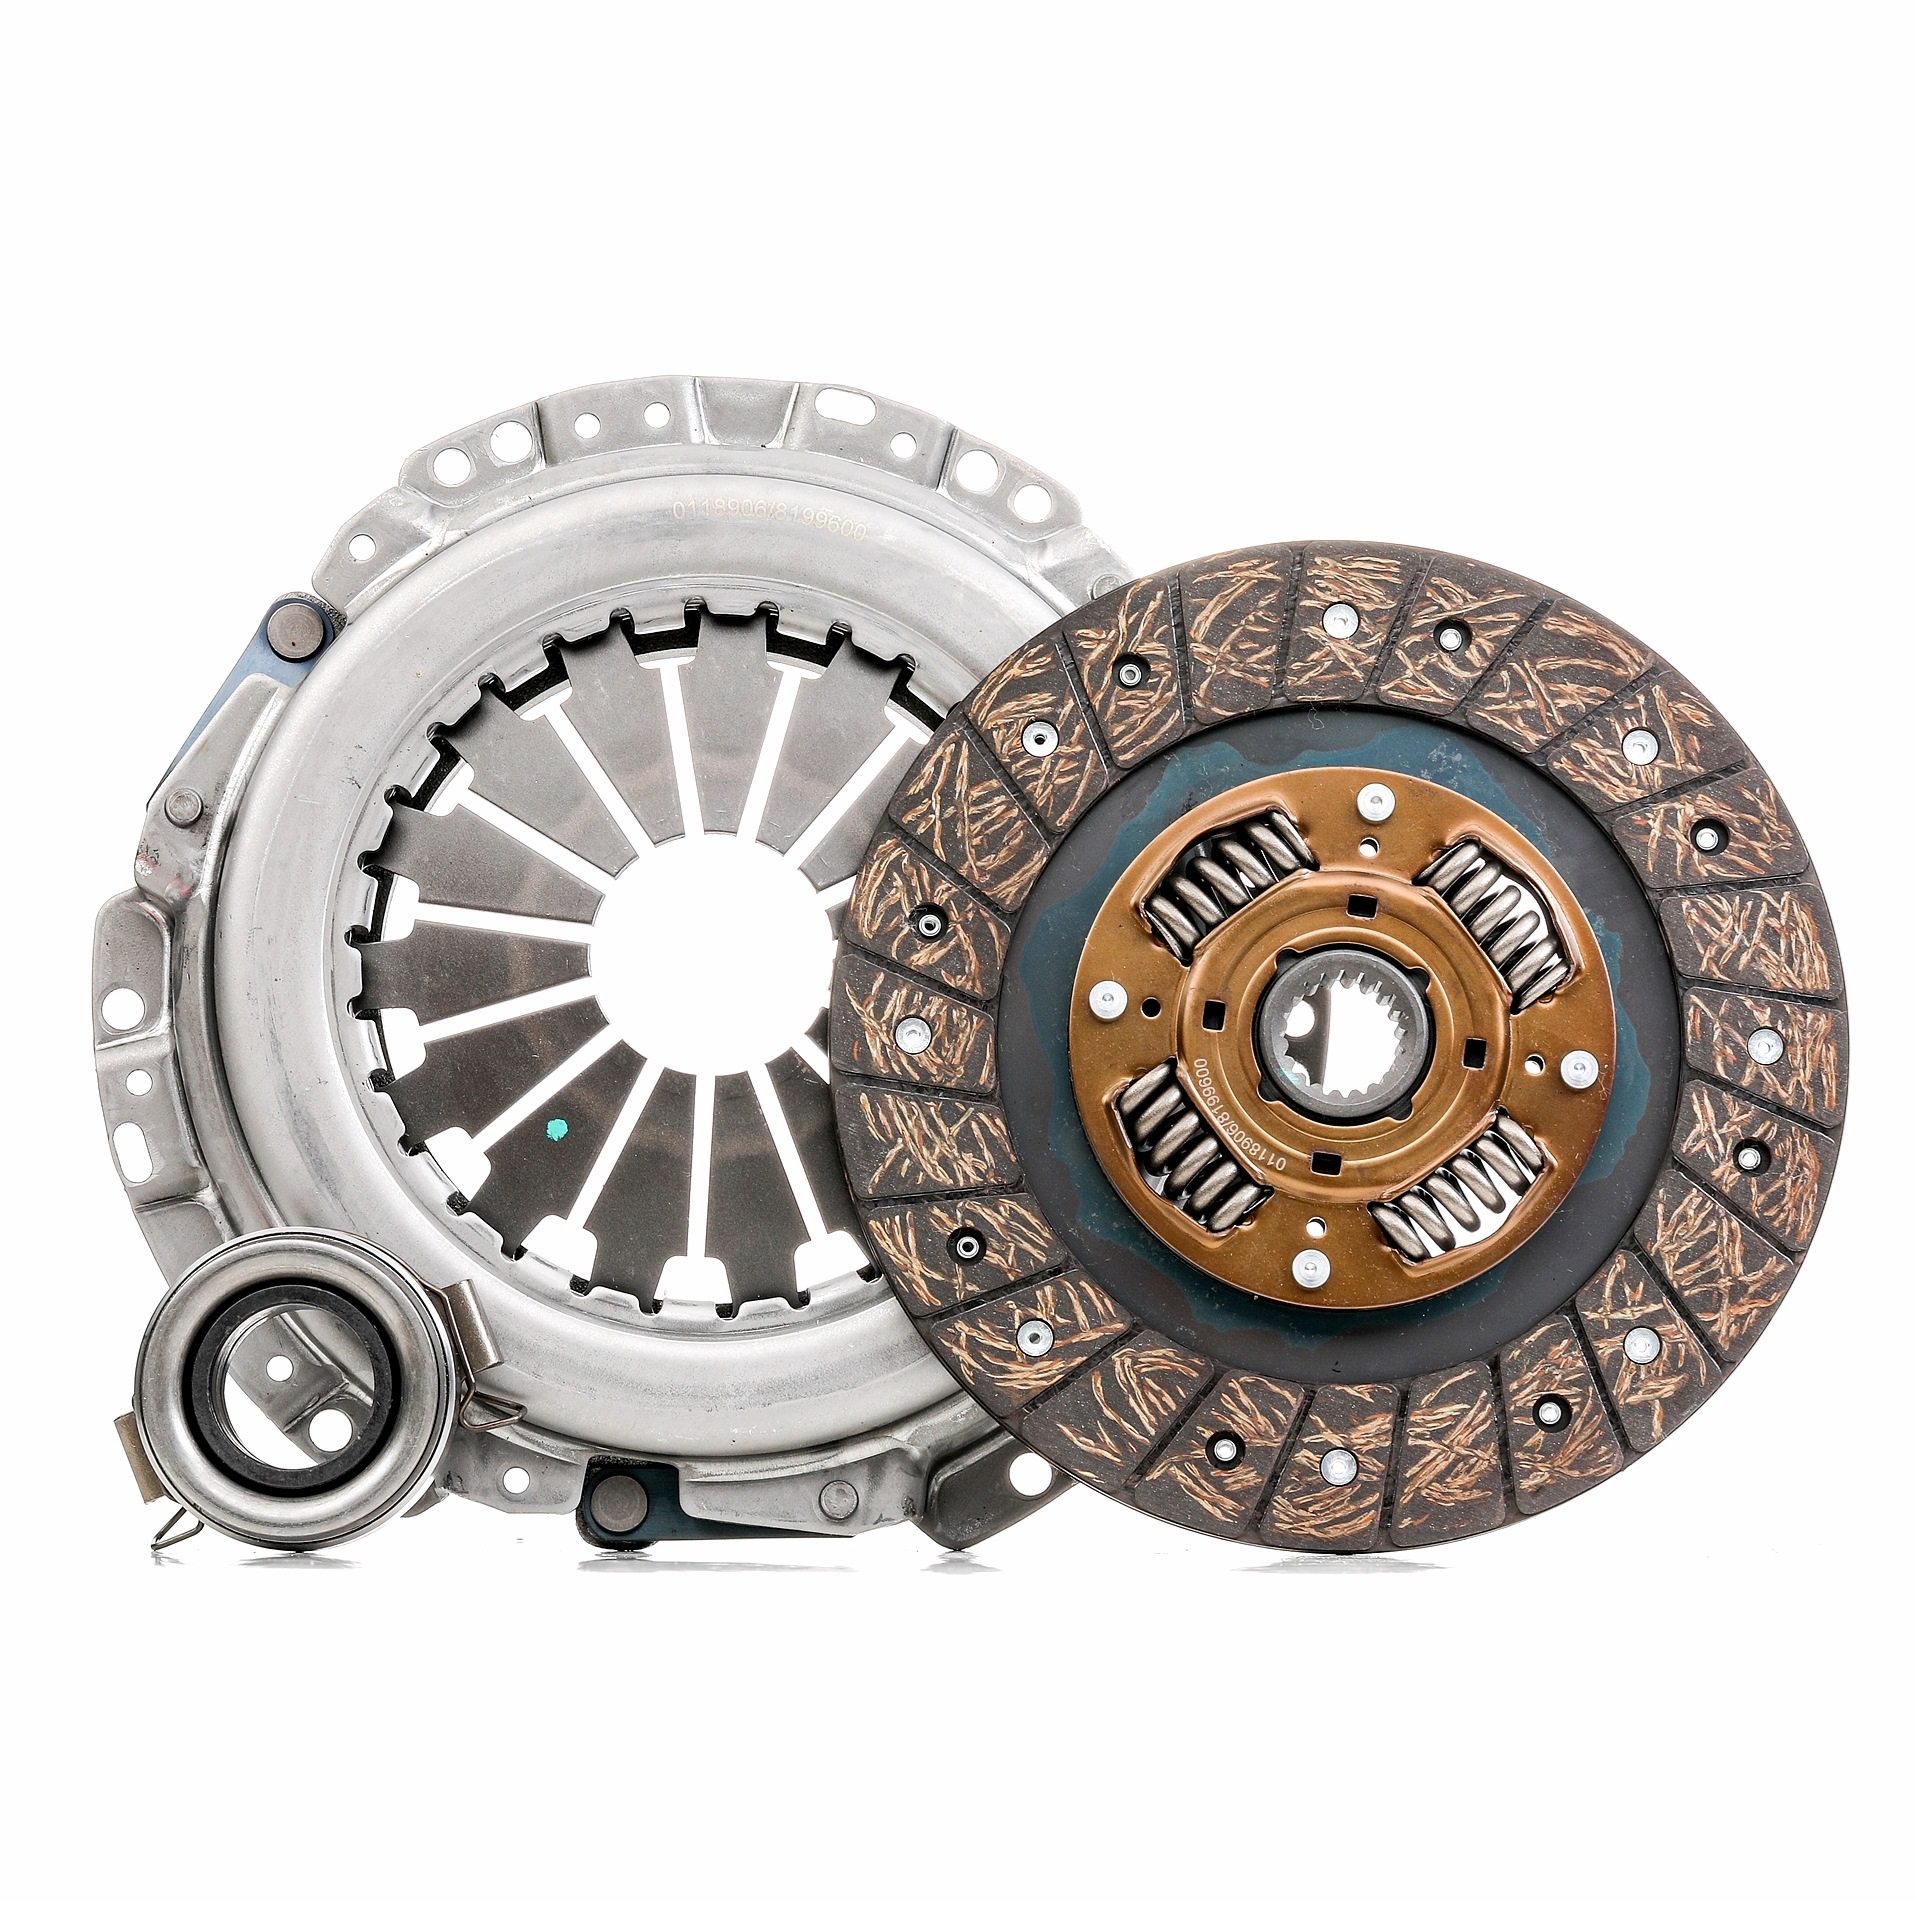 SKCK-0100204 STARK Clutch set TOYOTA three-piece, with clutch pressure plate, with clutch disc, with clutch release bearing, 230mm